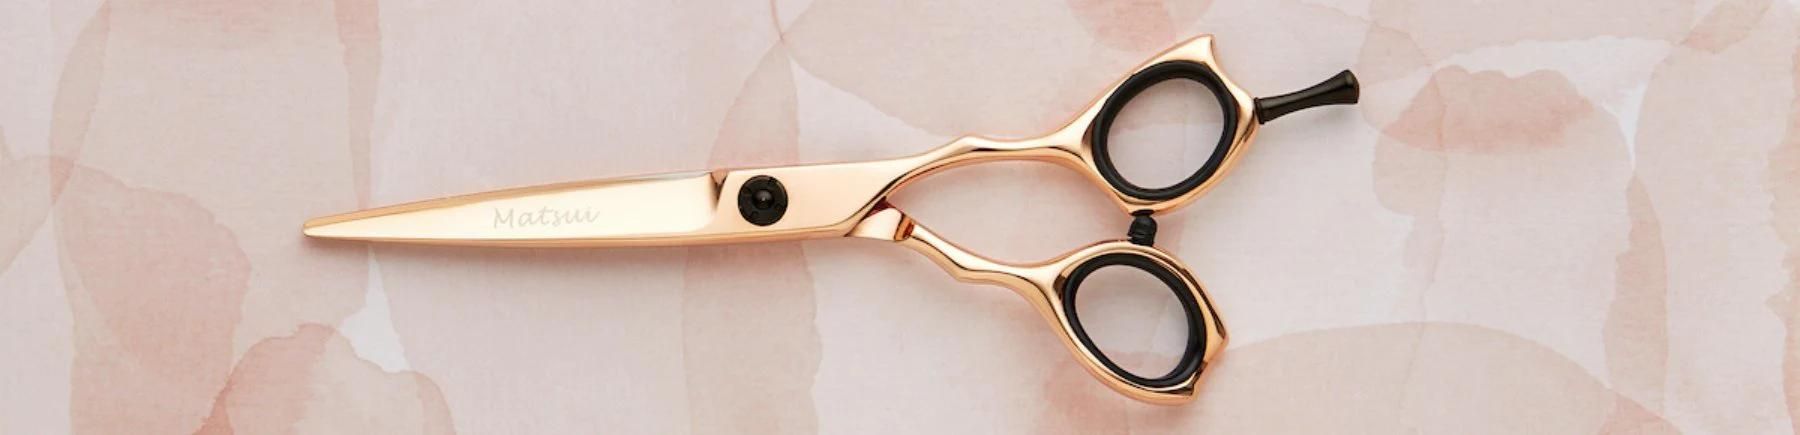 What Are The Best Scissors For You?